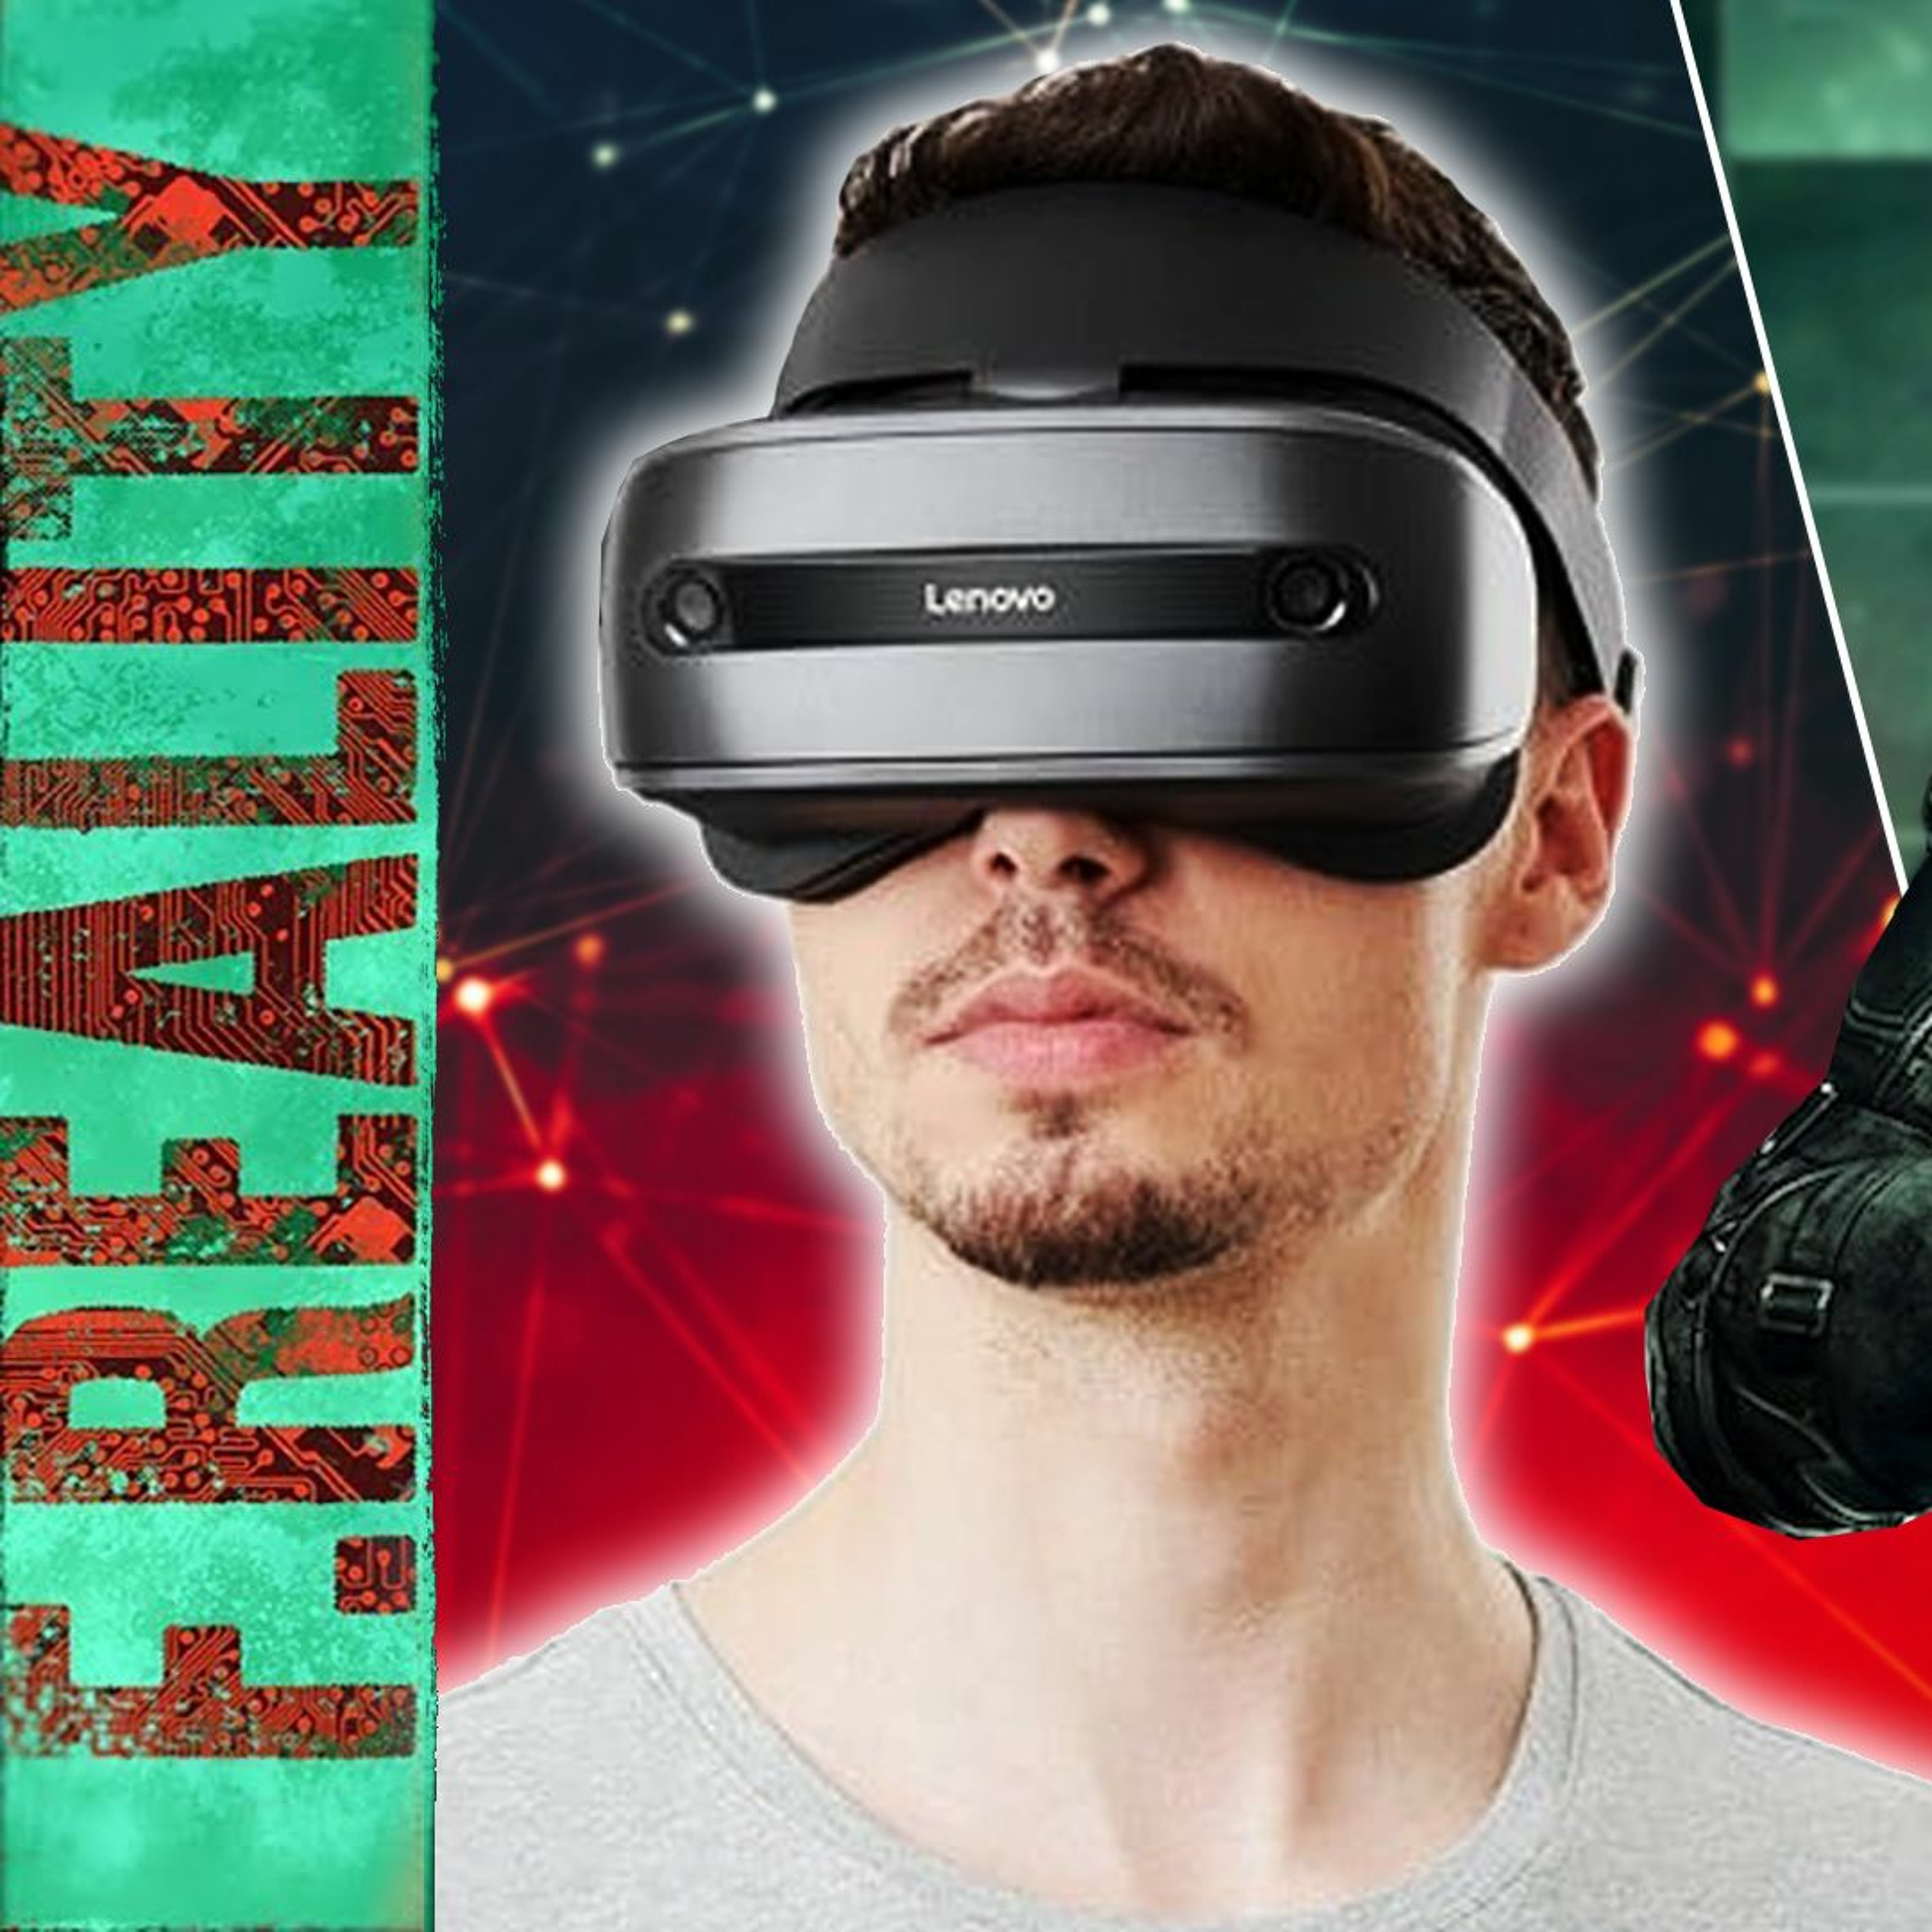 Ep.97 - Splinter Cell Coming To VR, Windows MR Out Of Stock & Bigscreen TV